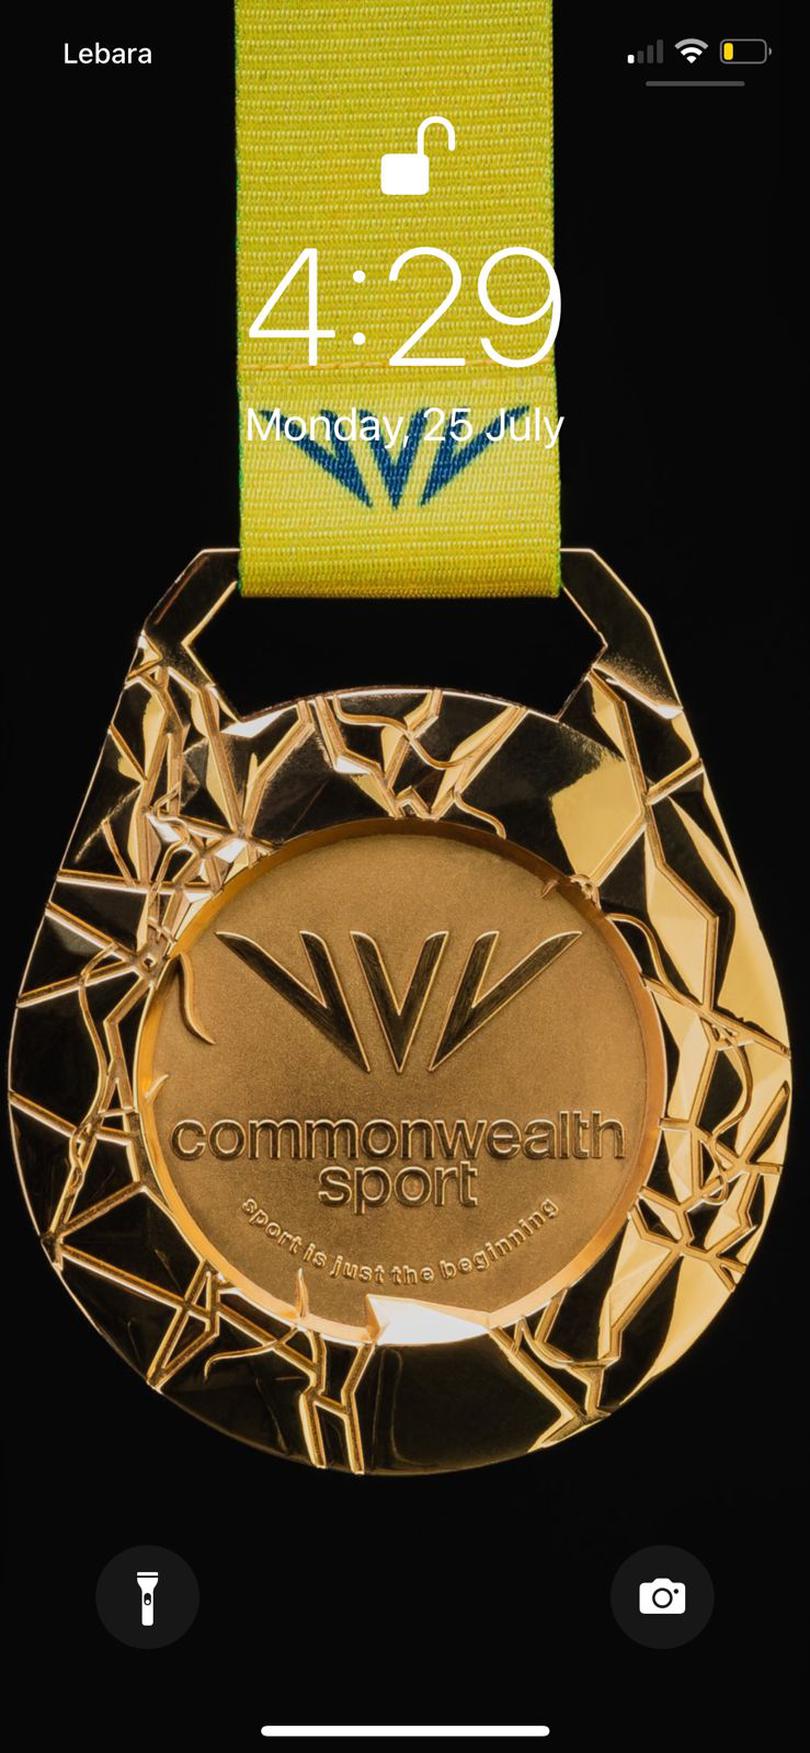 “When the design of the Commonwealth Games medals was released, I immediately downloaded the picture from social media. I saved the gold medal as my wallpaper,” Lalrinnunga said.